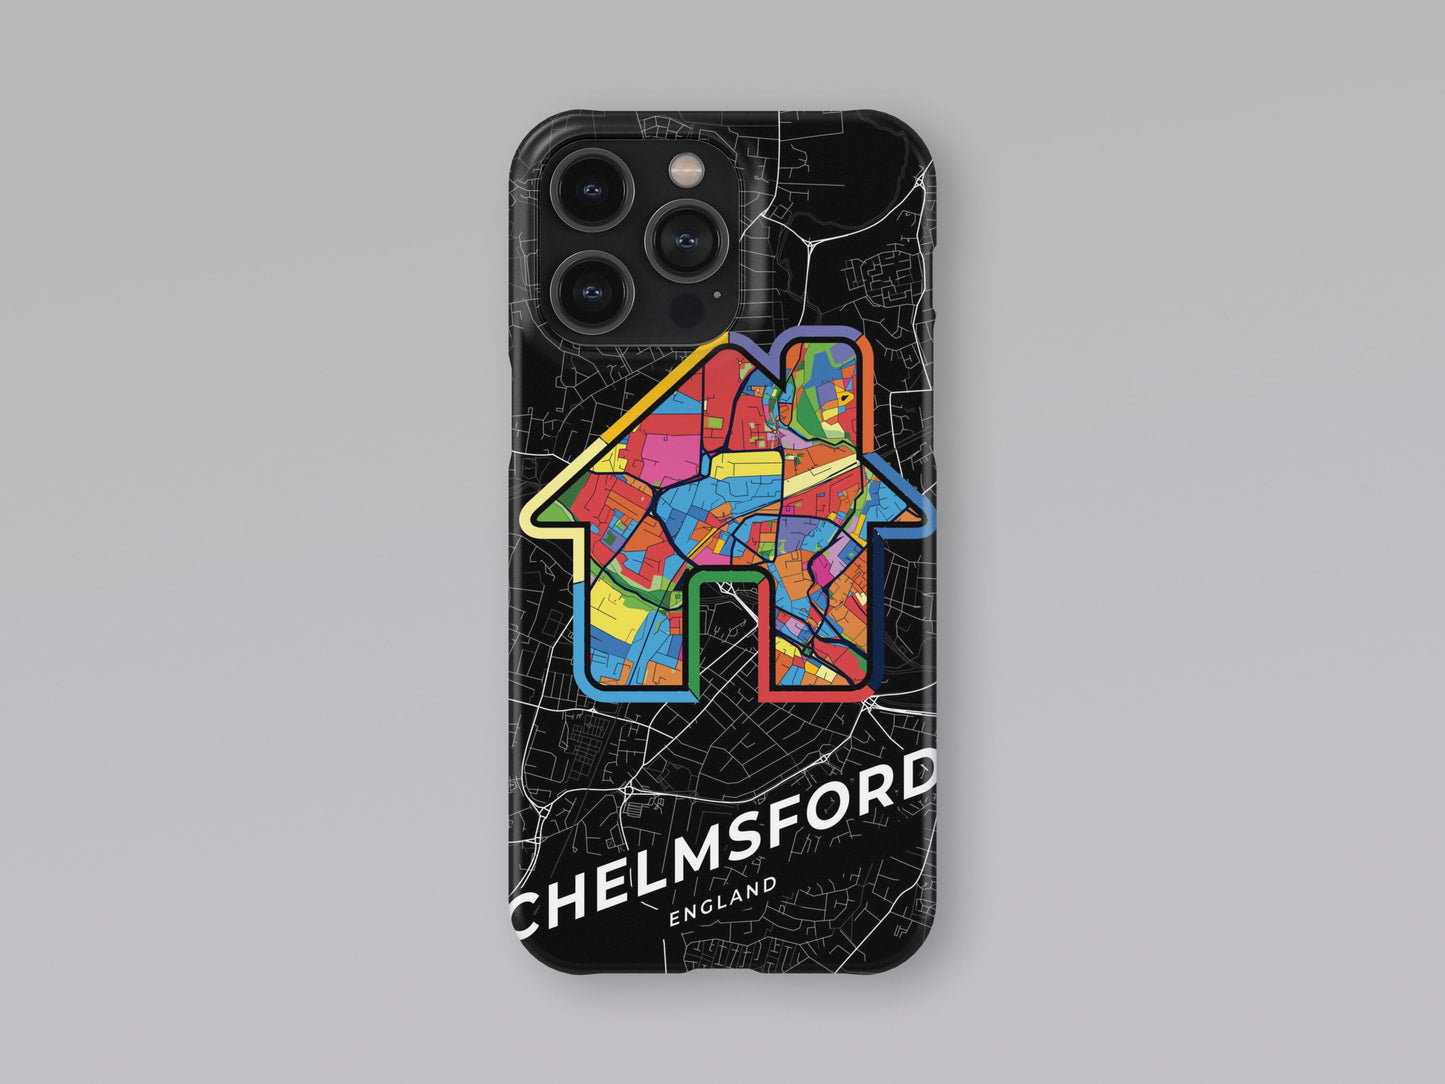 Chelmsford England slim phone case with colorful icon. Birthday, wedding or housewarming gift. Couple match cases. 3